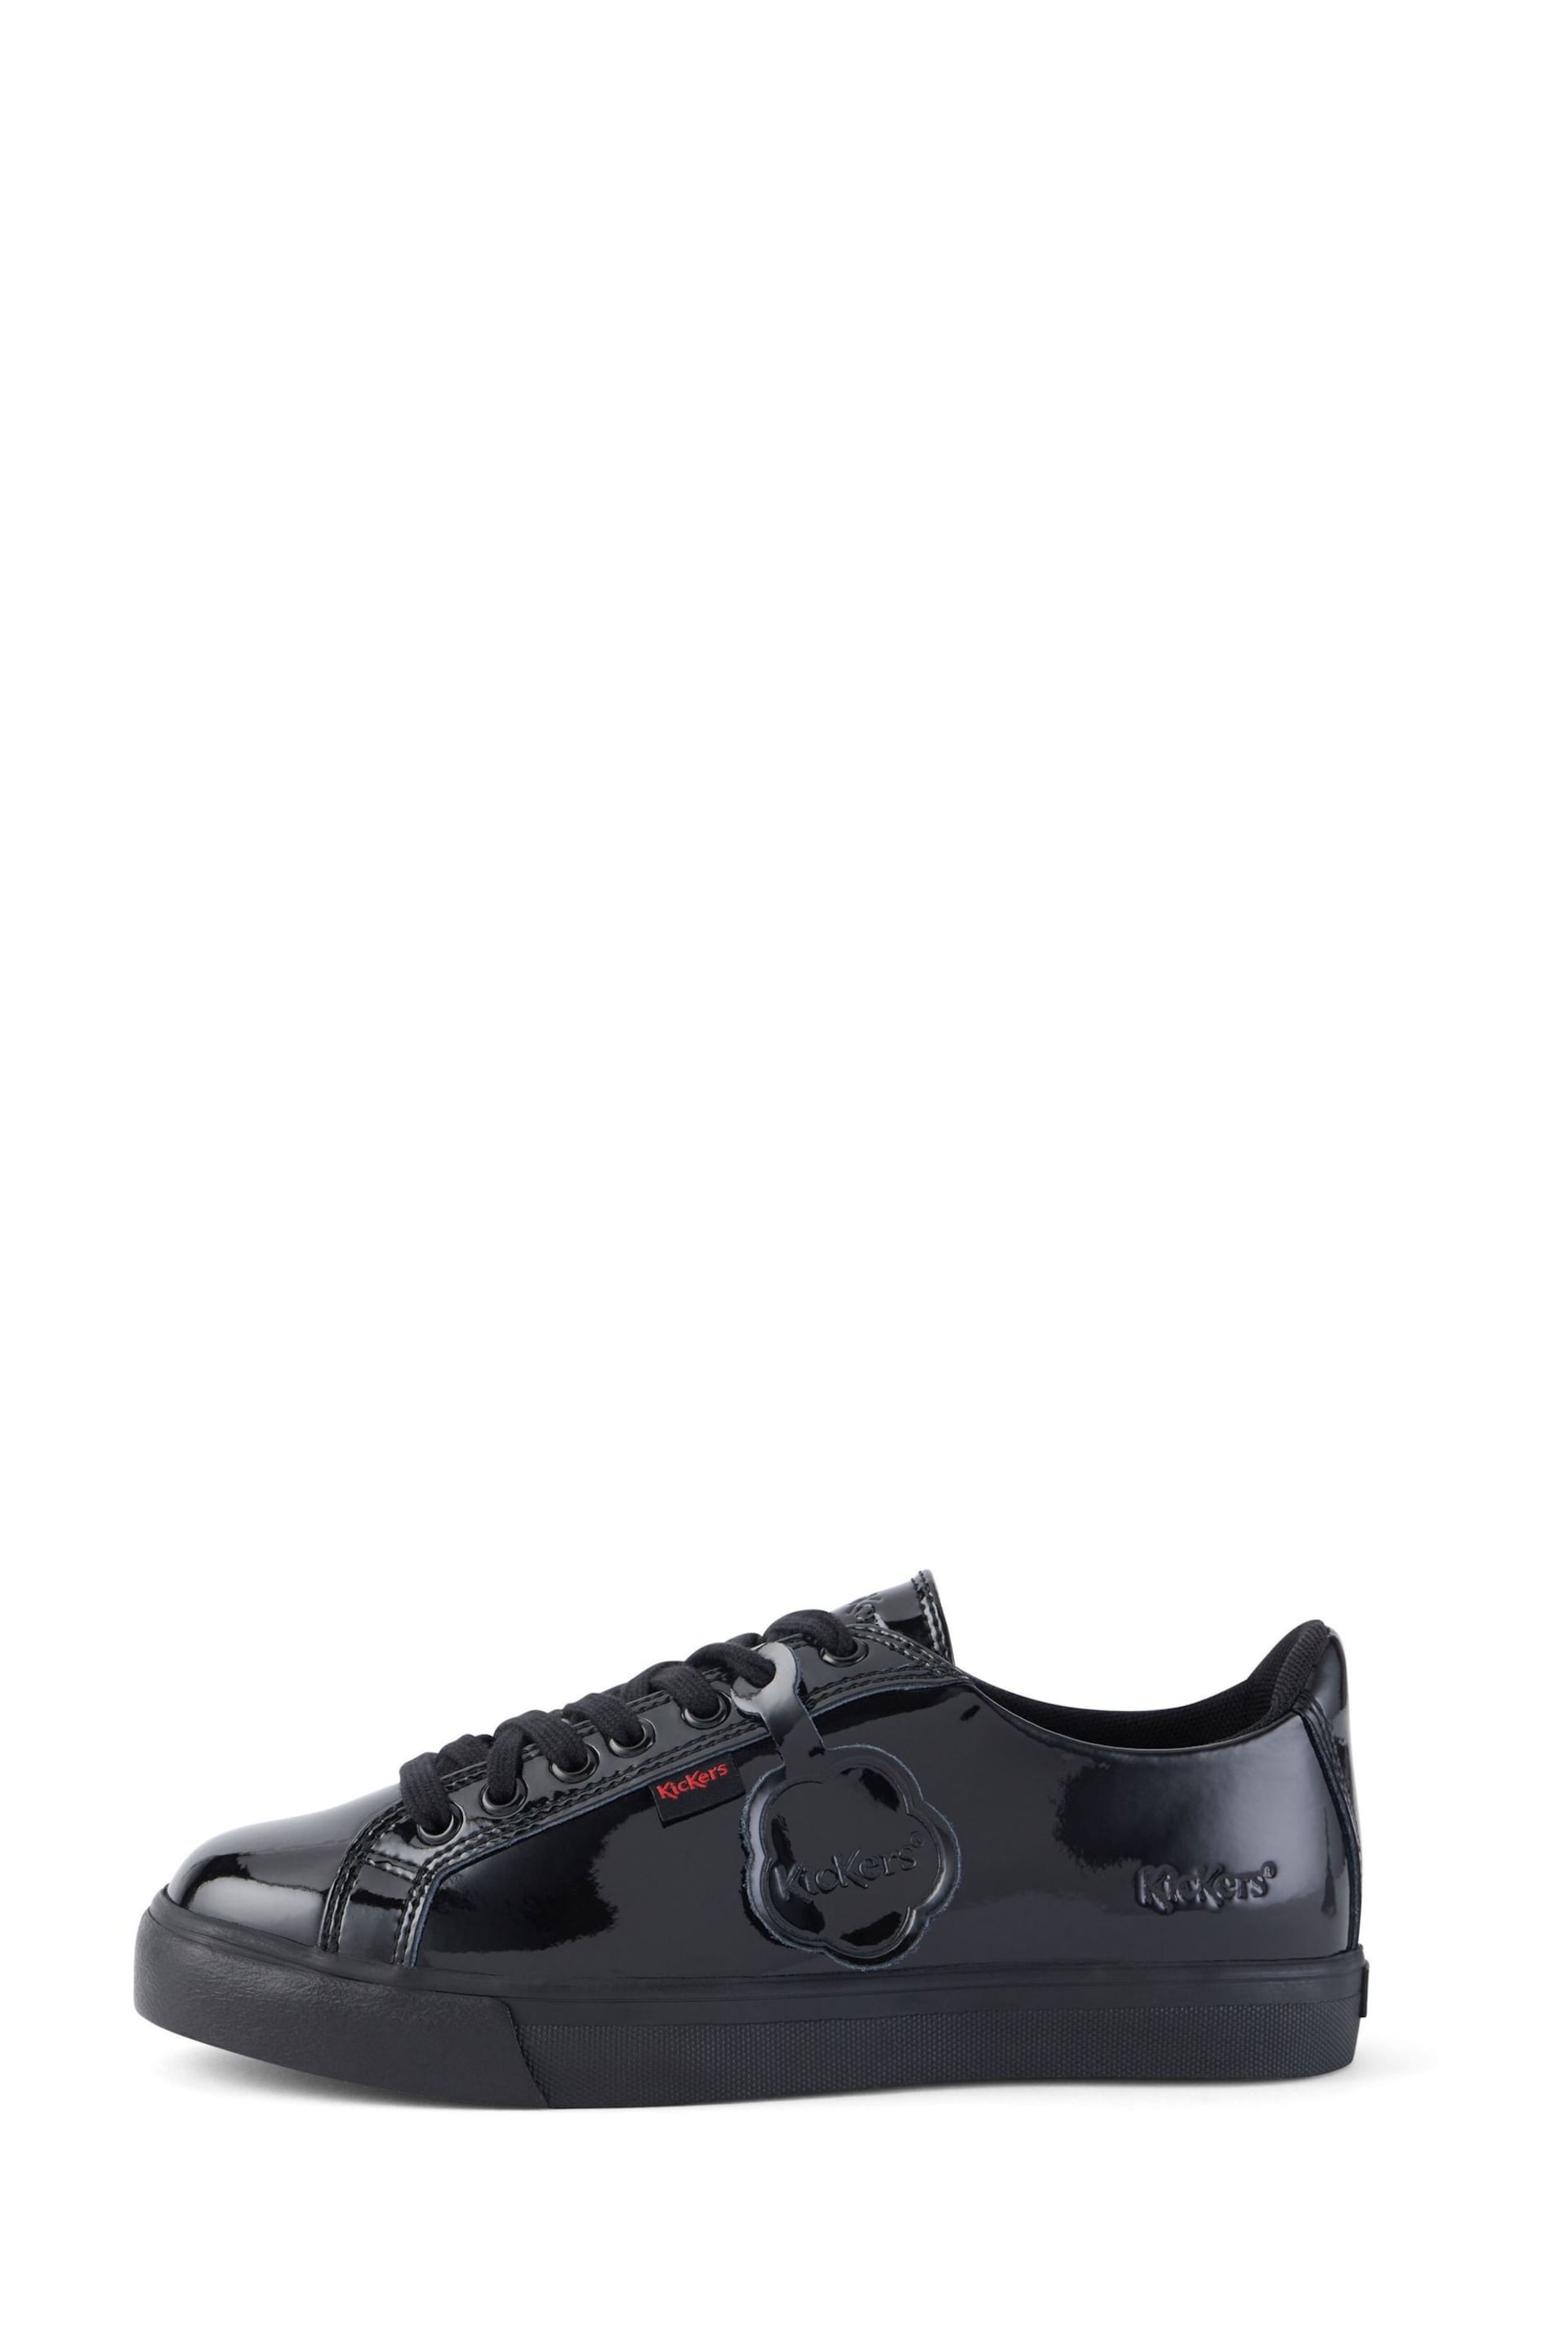 Kickers Black Tovni Lacer Shoes - Image 2 of 8